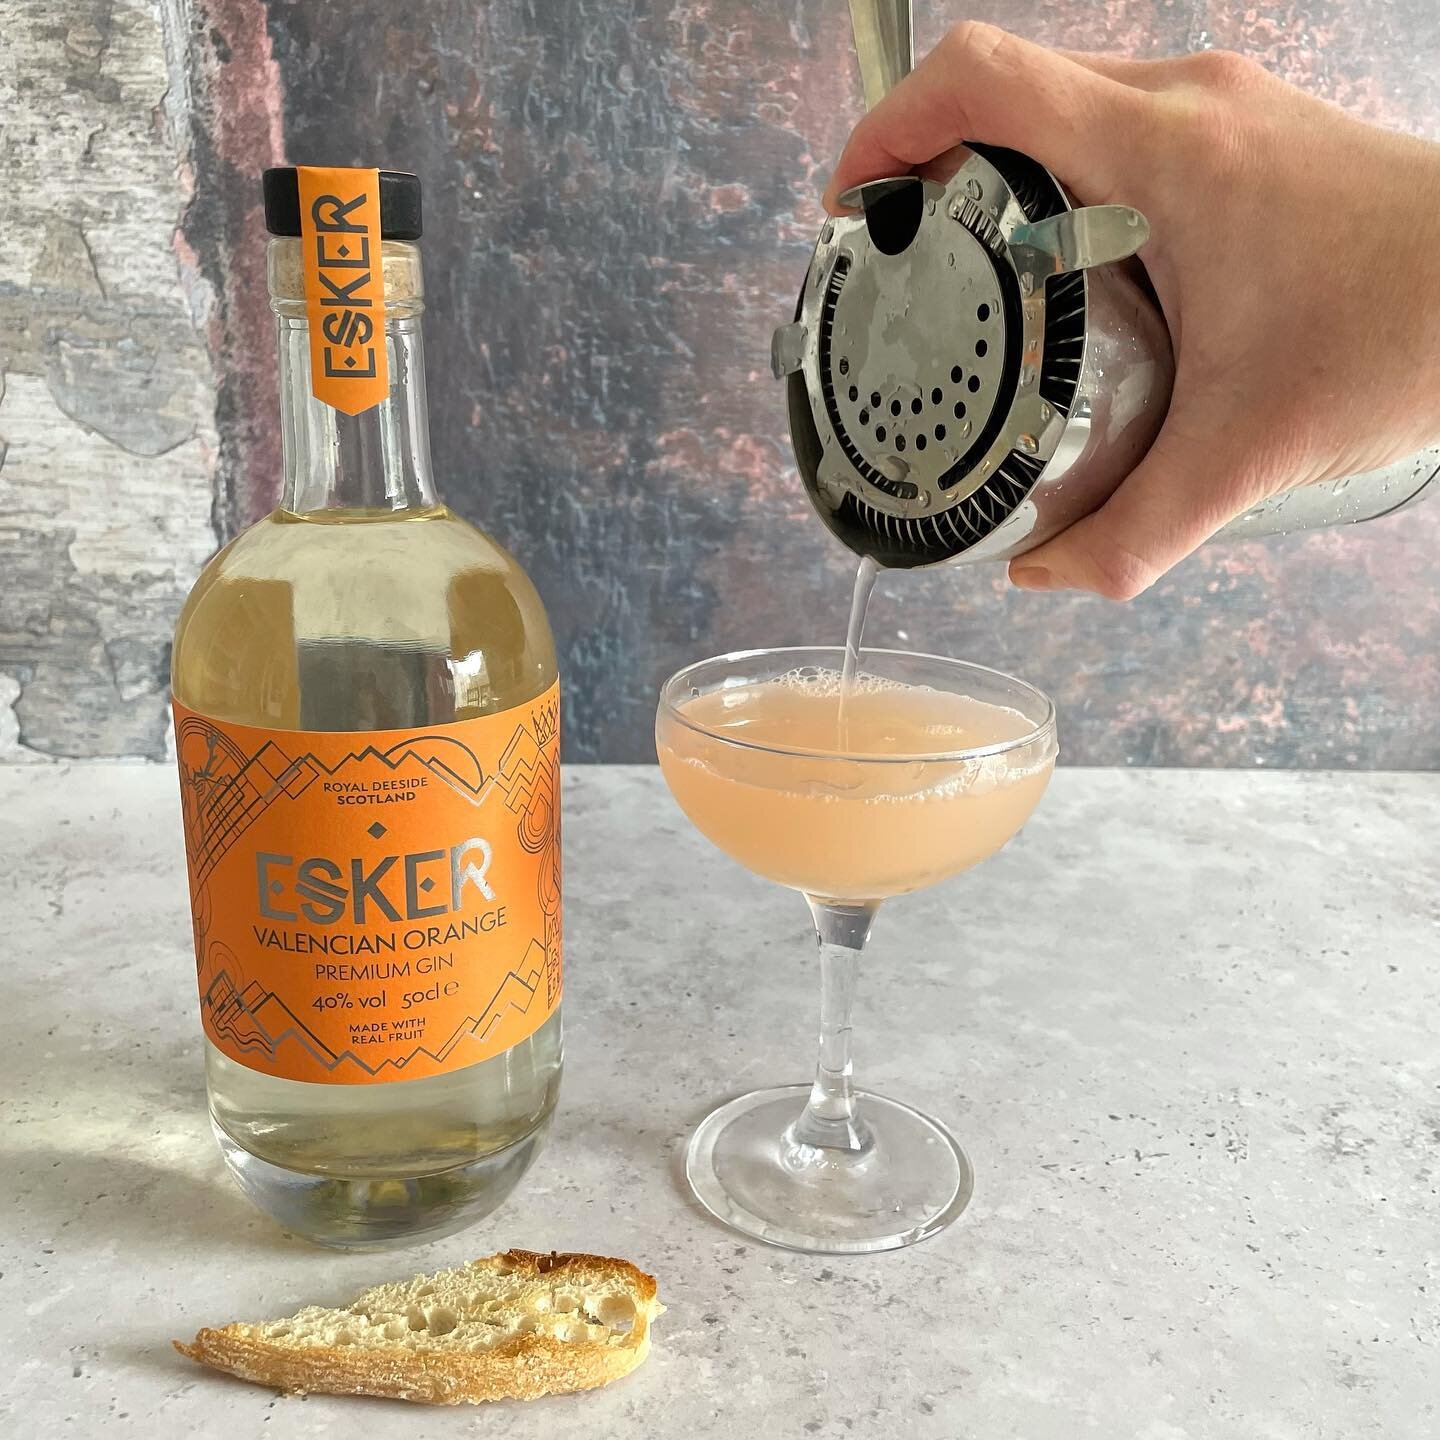 Is this what you meant when you said you want to go for brunch this weekend?

The Deeside Breakfast Martini is made using our Valencian Orange Gin 🍊50ml Esker Valencian Orange Gin, 10ml Cointreau, 20ml lemon juice, 1 teaspoon of marmalade, orange ze